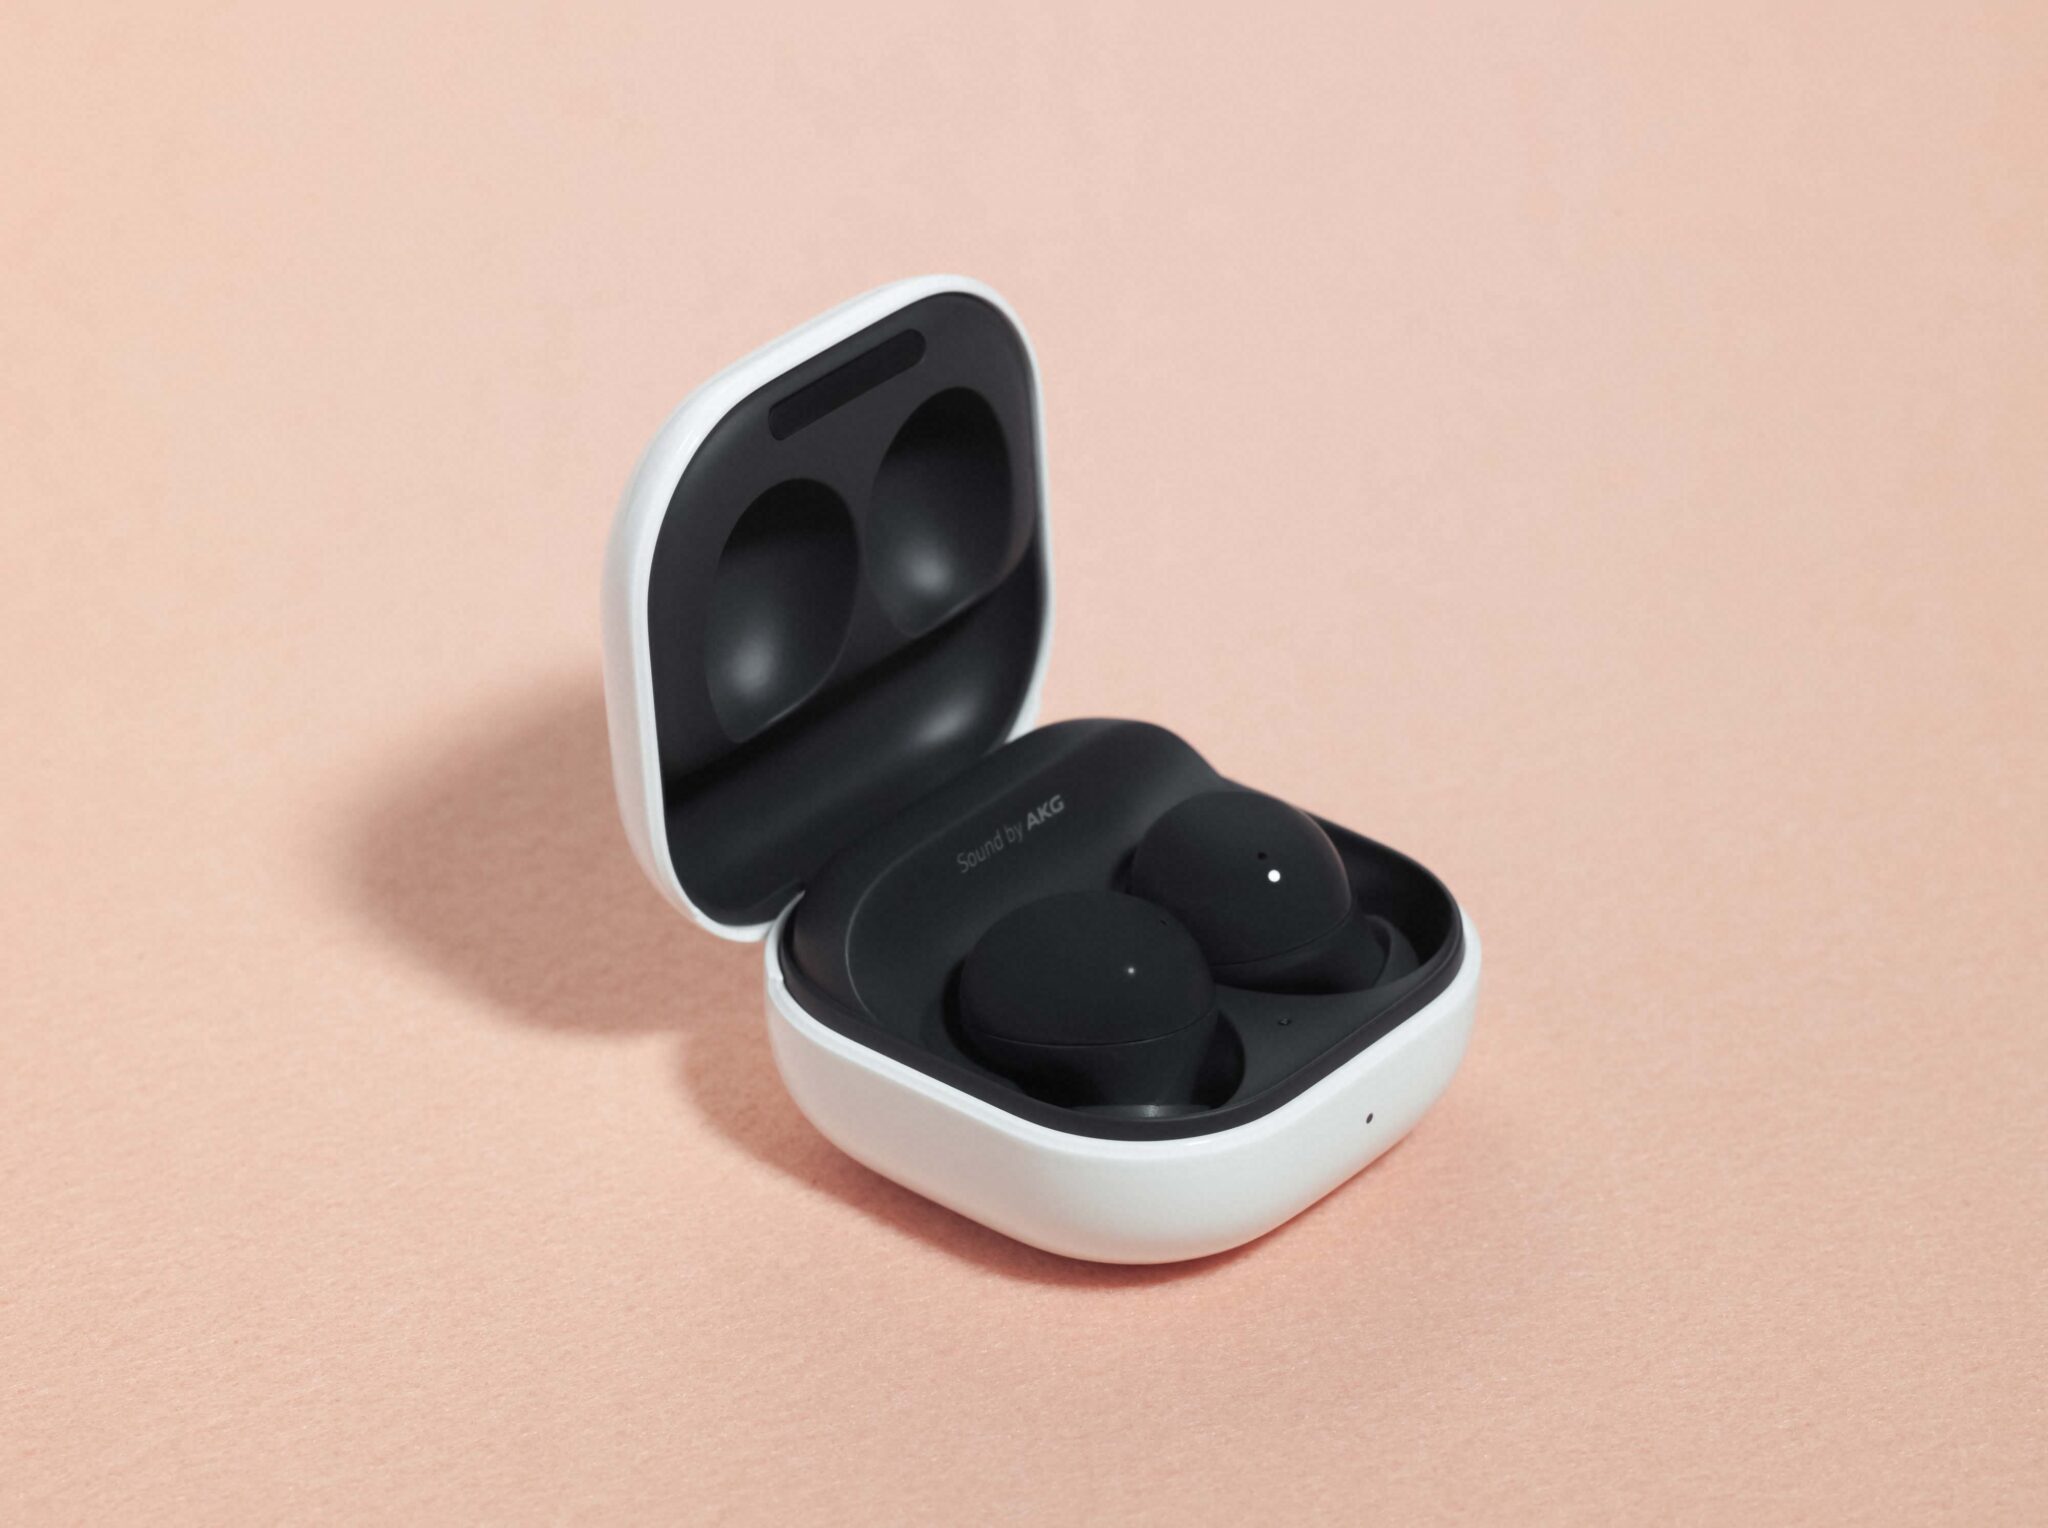 02 01 Berry product 01 galaxybuds2 graphite L 2048x1528 1